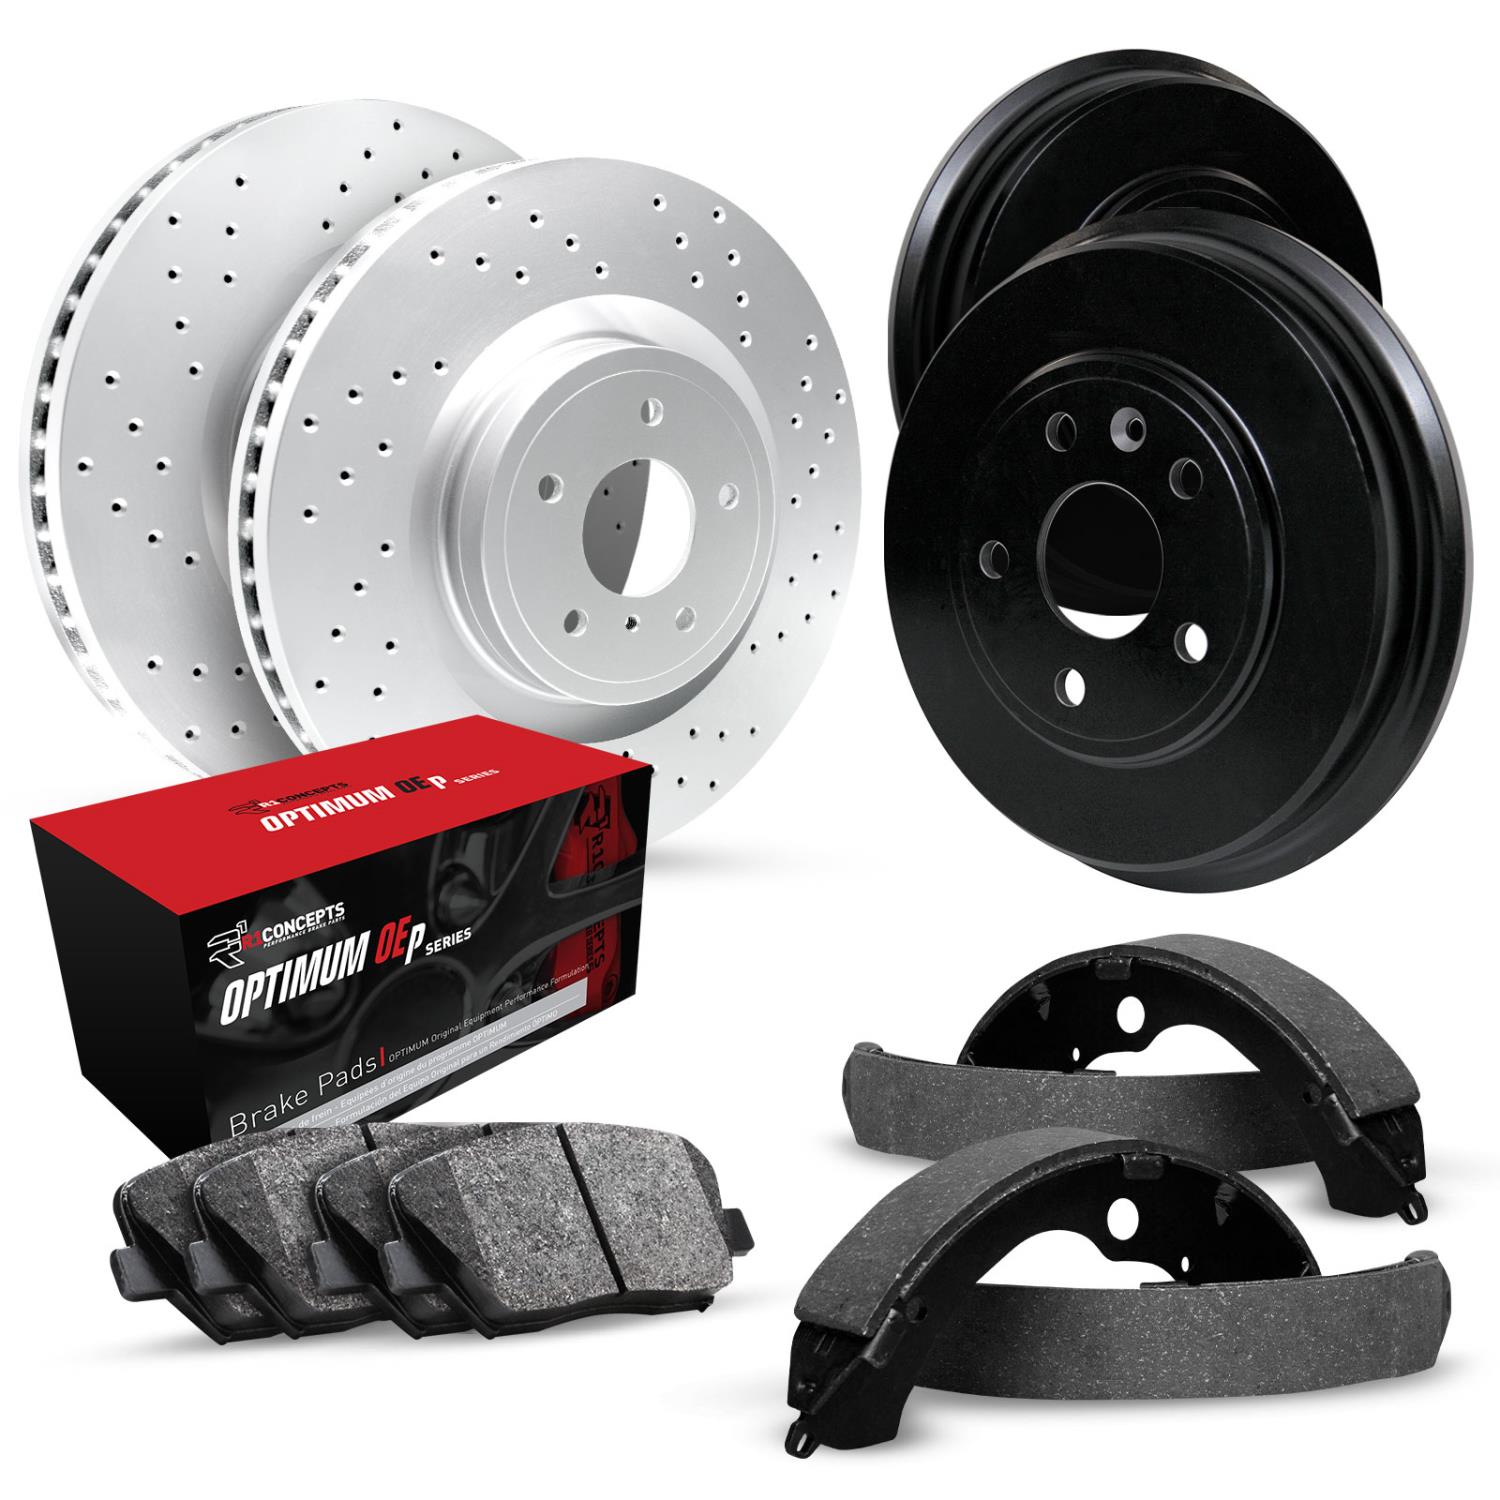 GEO-Carbon Drilled Brake Rotor & Drum Set w/Optimum OE Pads & Shoes, 1986-1990 GM, Position: Front & Rear